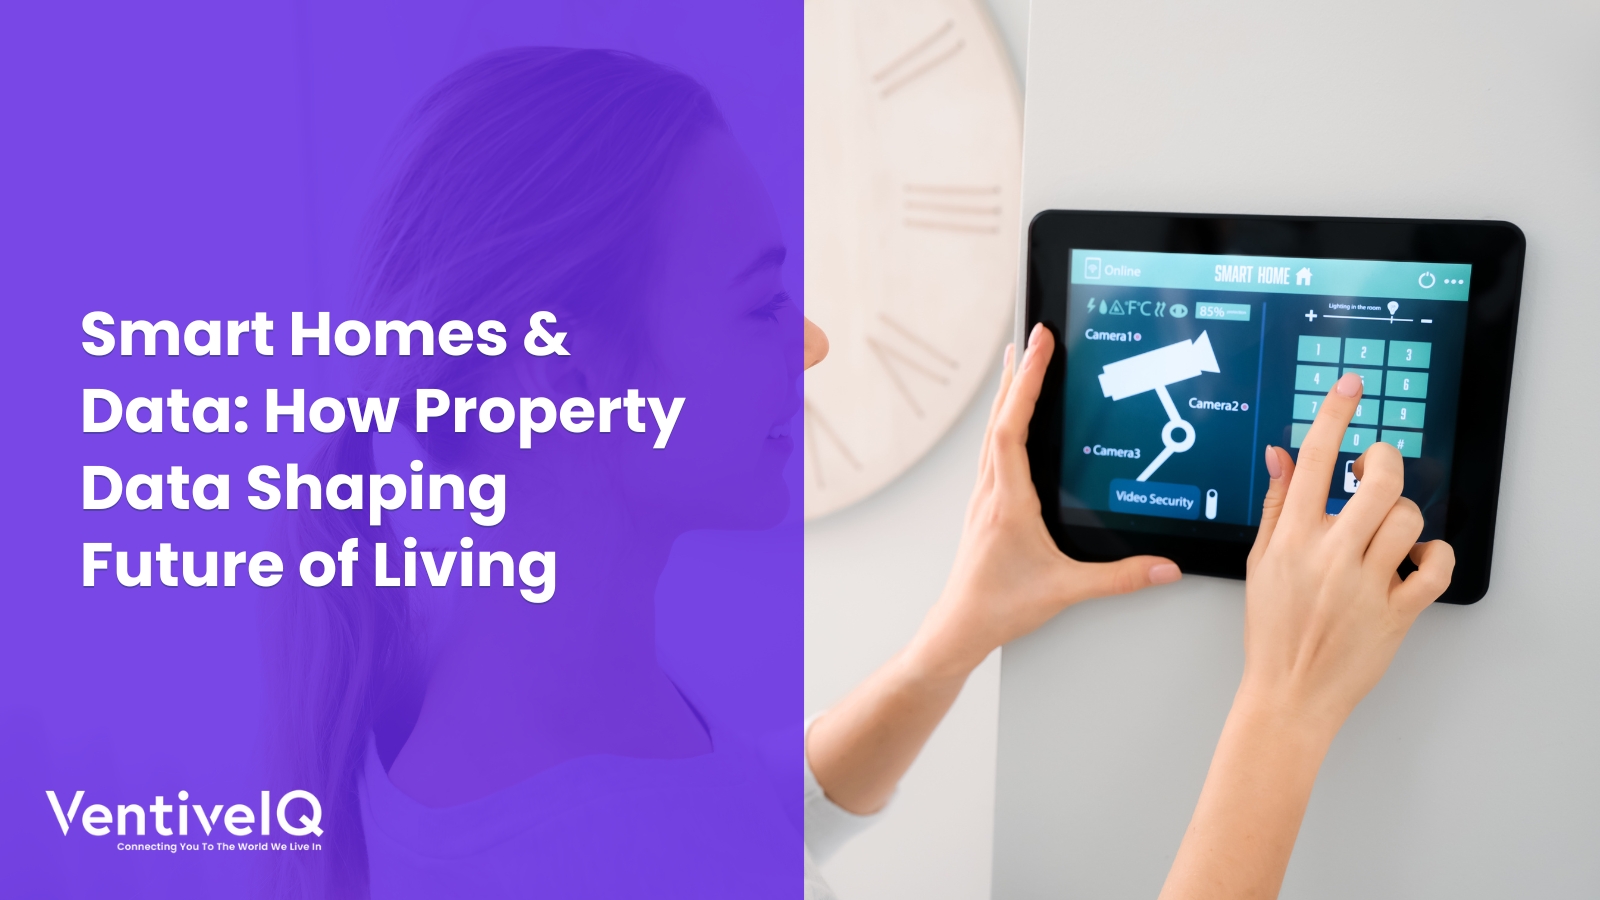 Smart Homes & Data: How Property Data Shaping Future of Living